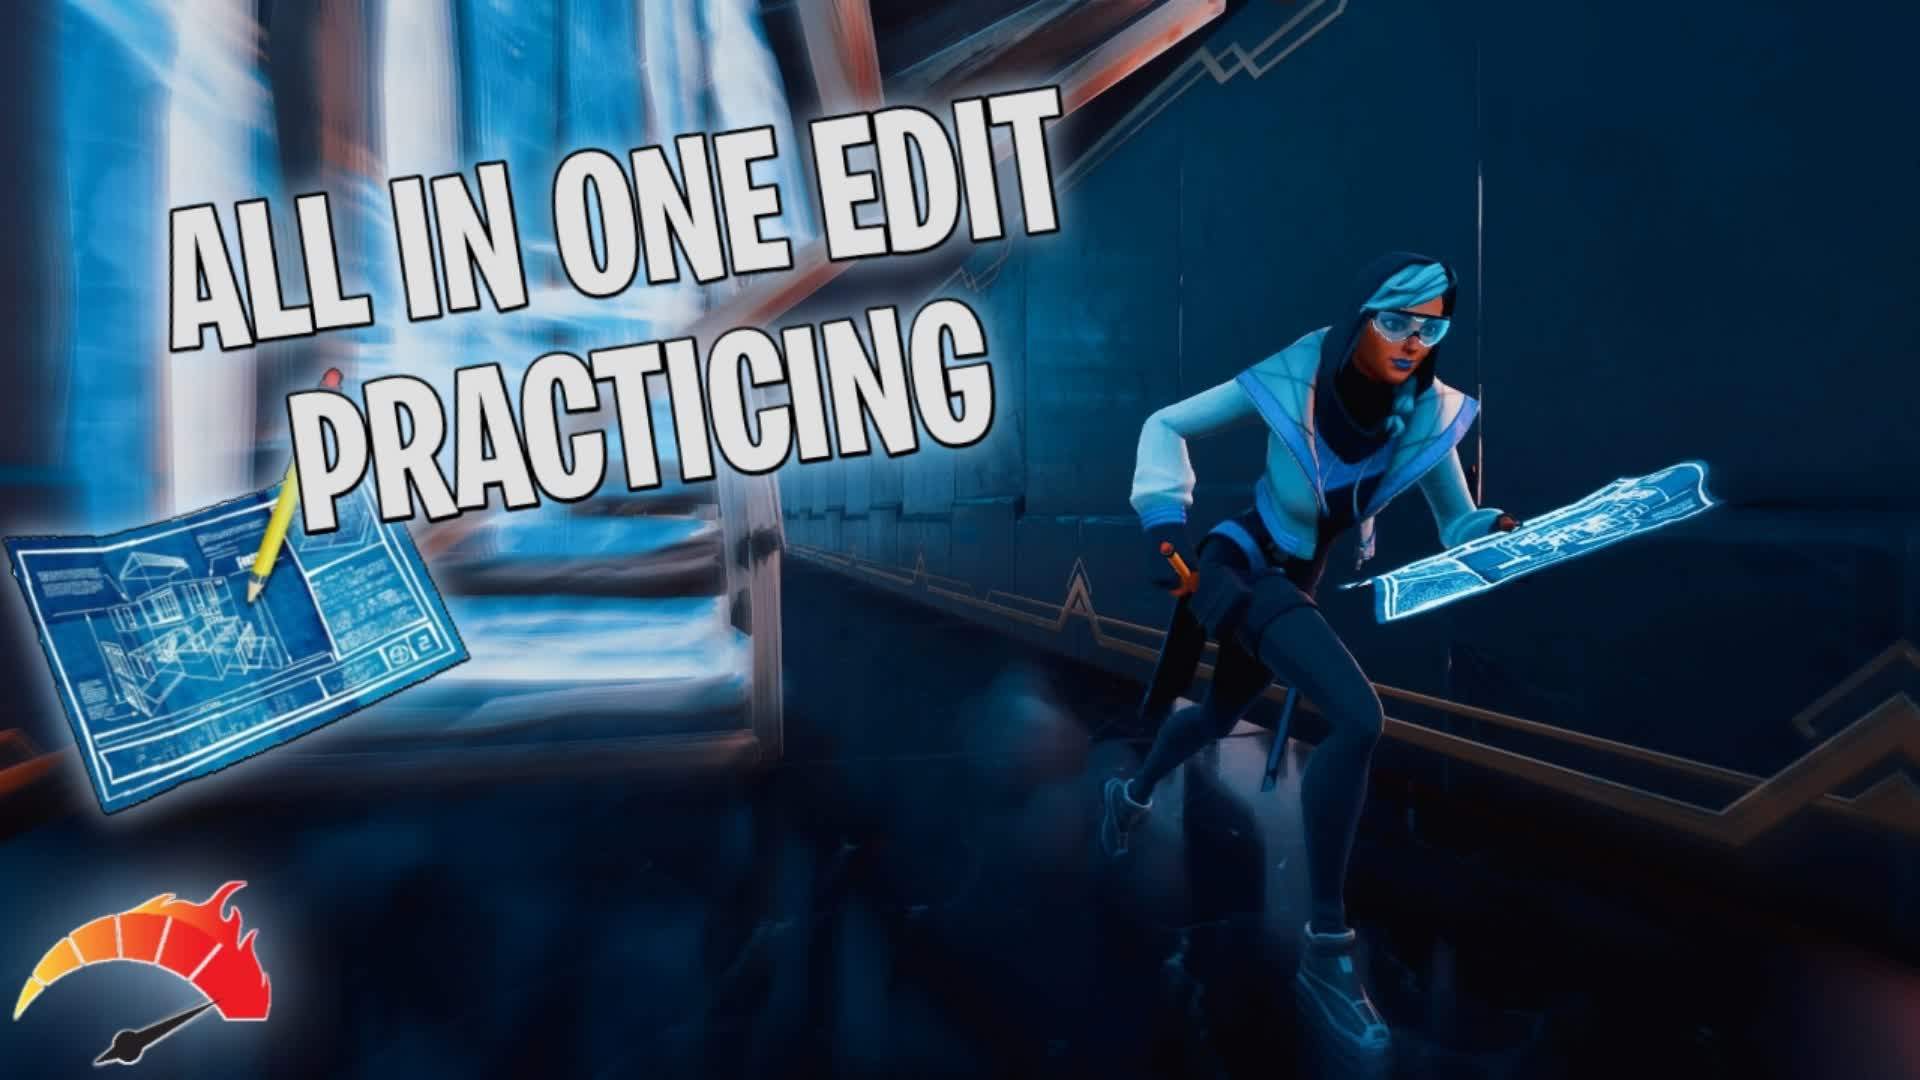 ALL IN ONE EDIT PRACTICING